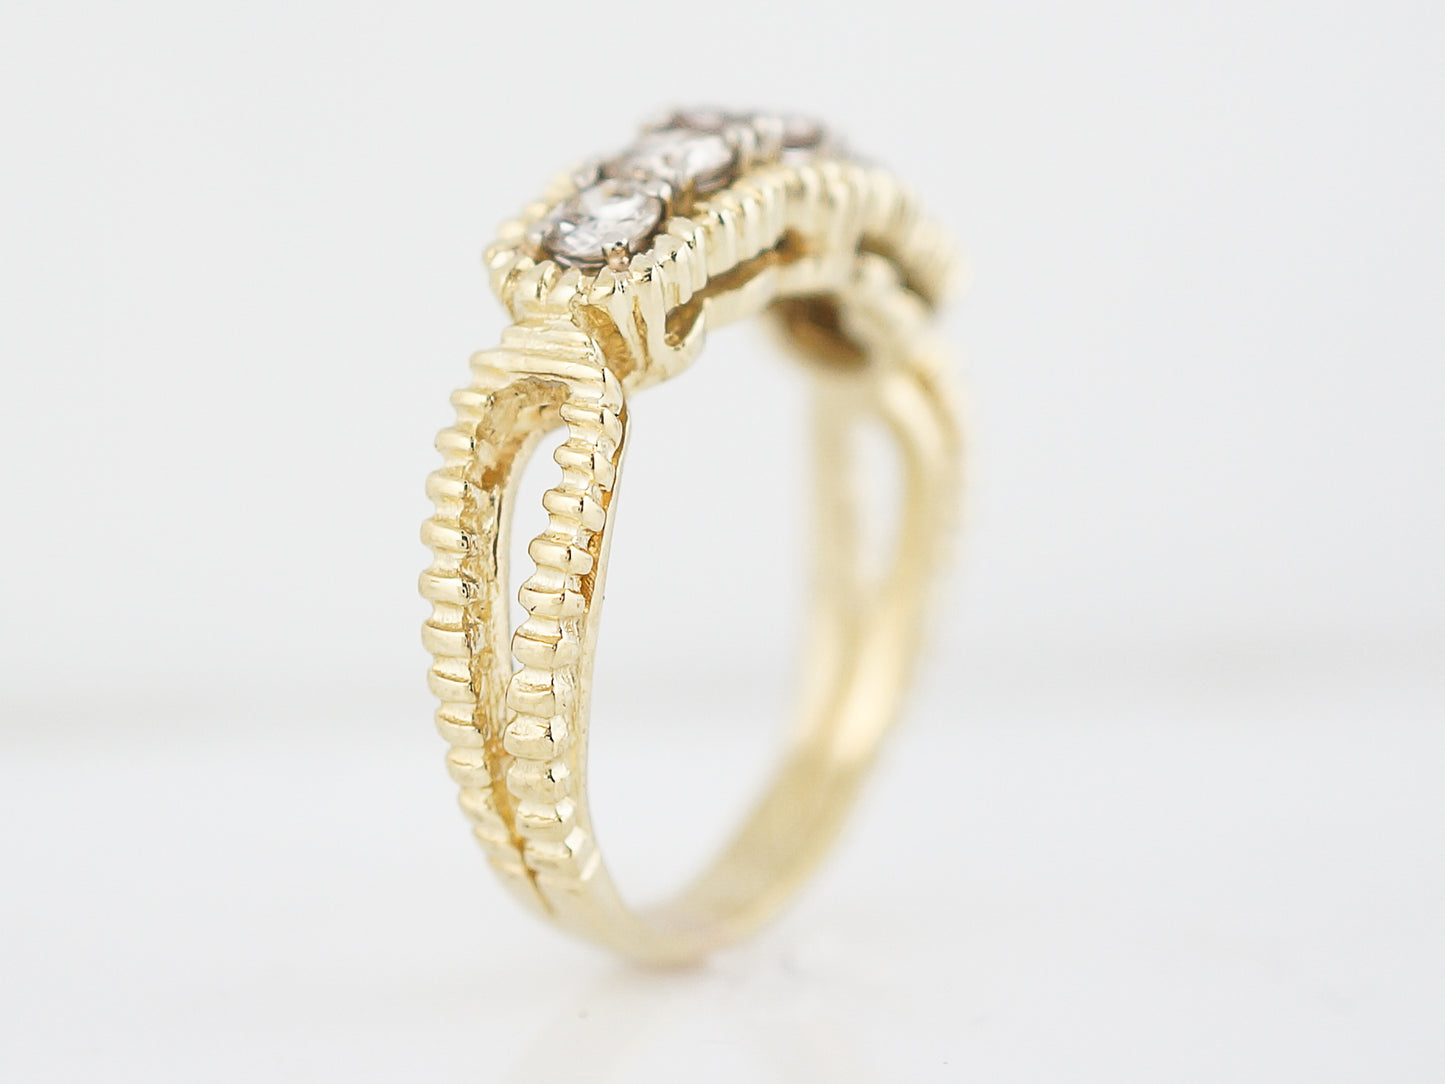 Vintage Right Hand Ring Mid Century 1.05 Round Brilliant Cut Diamonds in 14K Yellow Gold